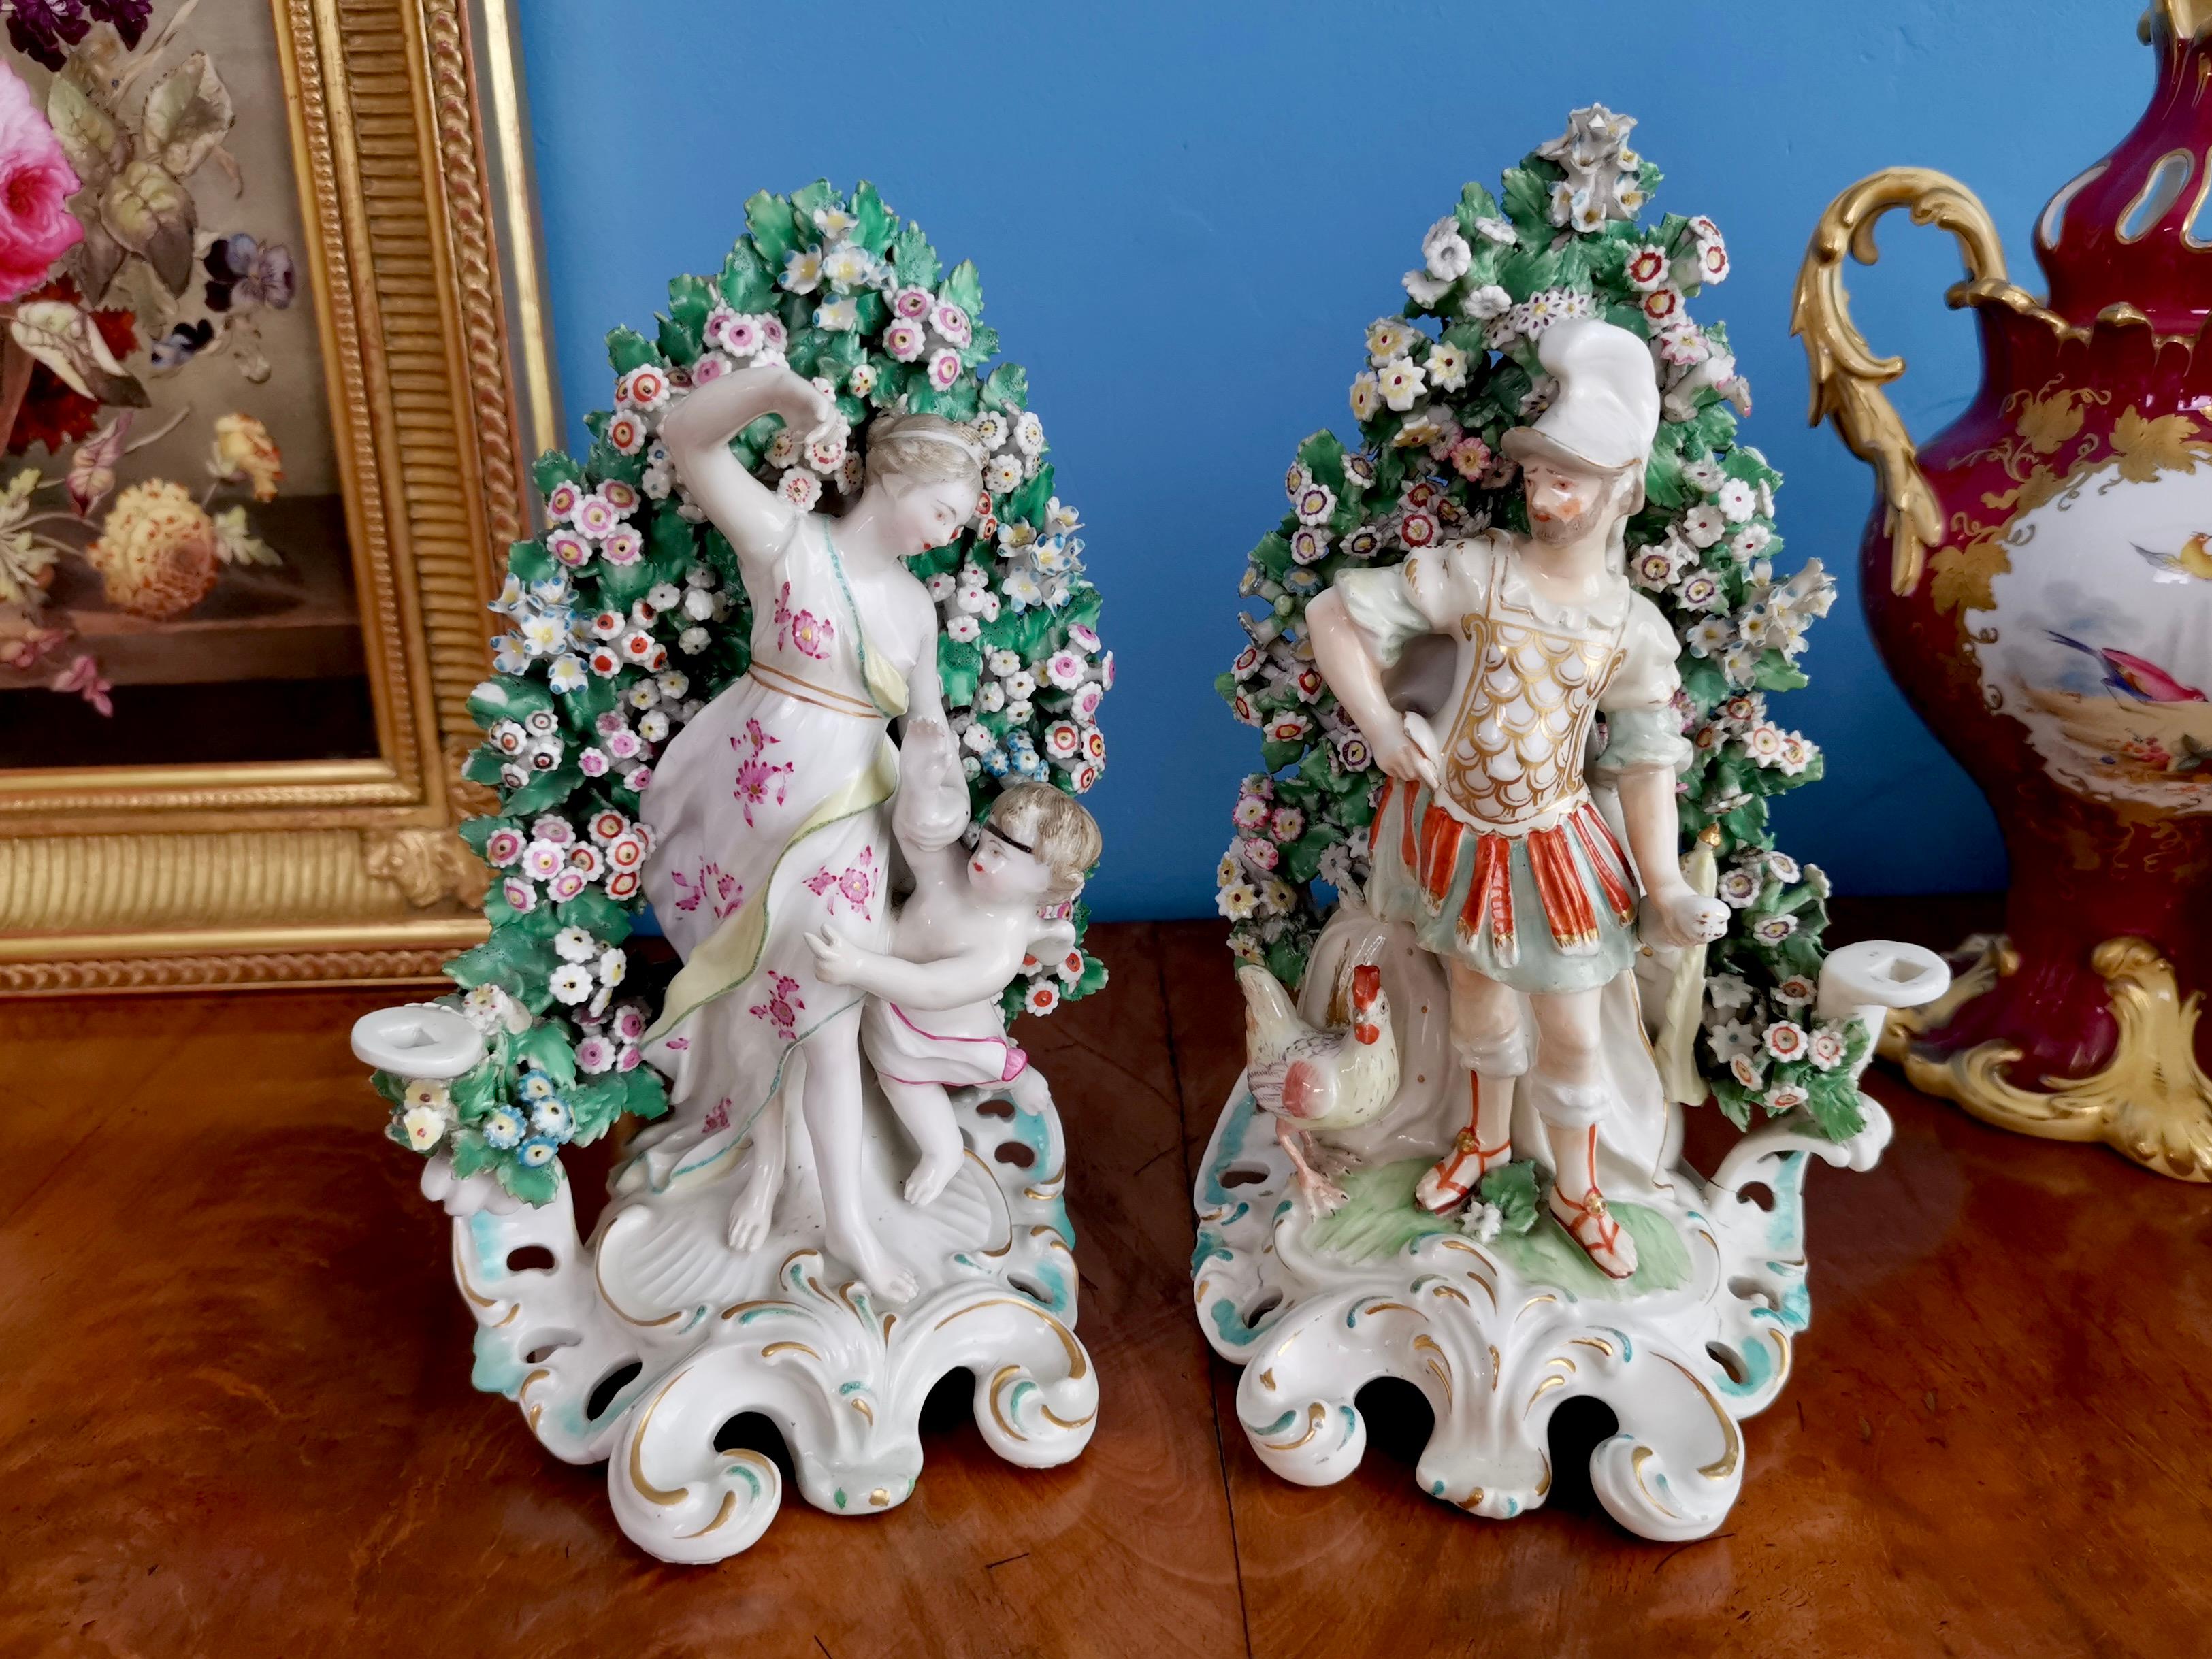 This is a fabulous pair of Derby porcelain figures of Mars and Venus, made between 1759 and 1769, which was the Rococo era. This is what is called the 